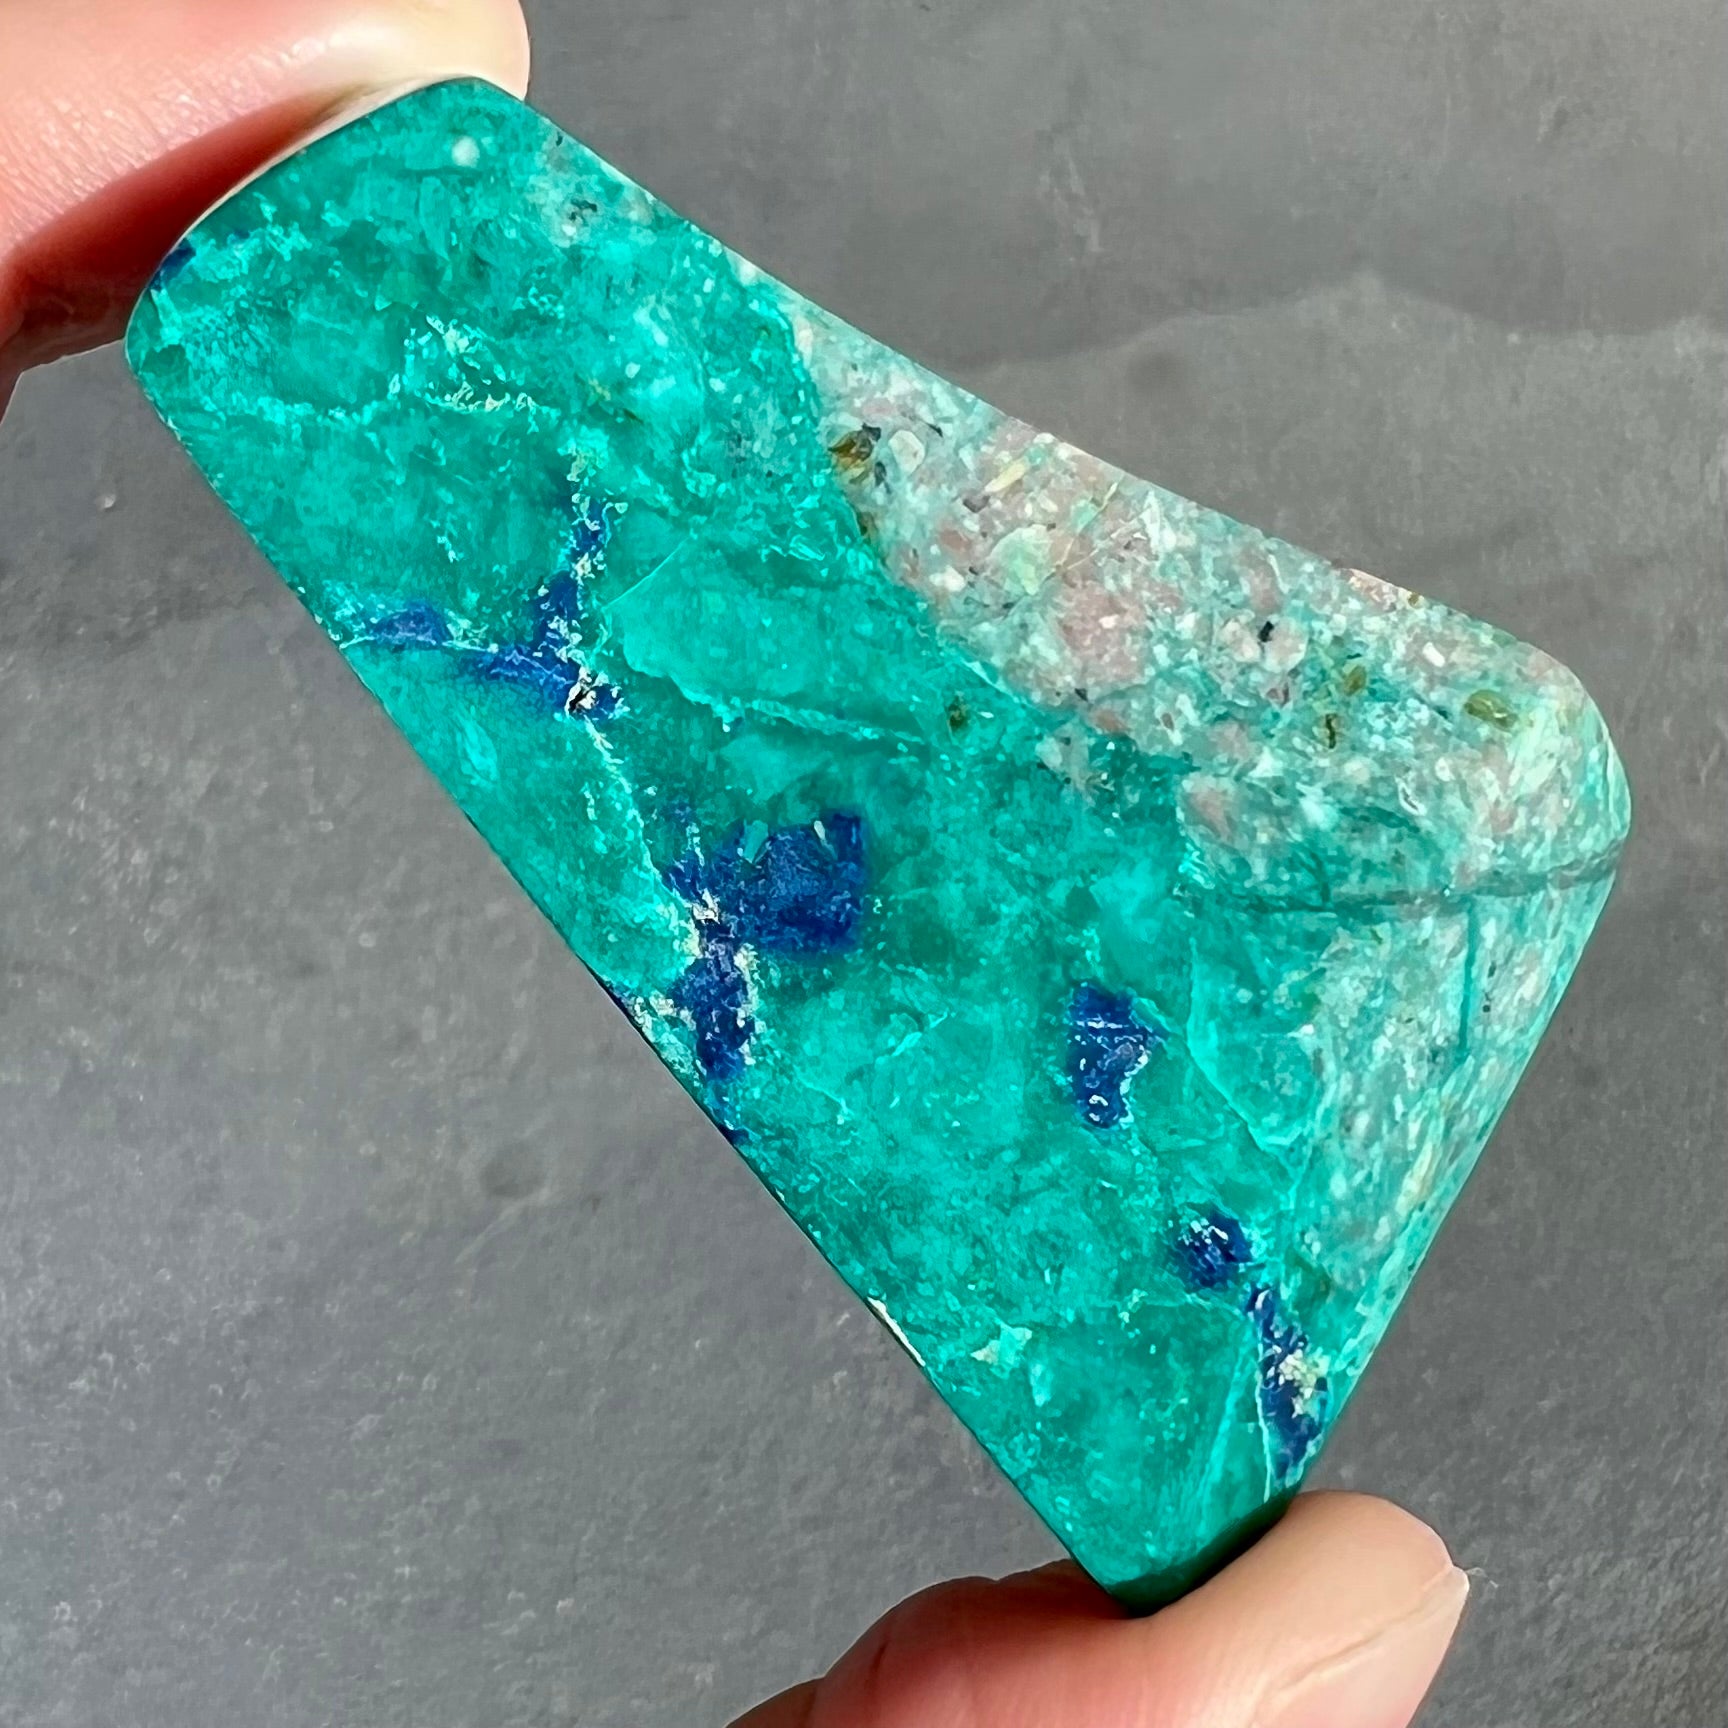 A loose polished sculpture of green chrysocolla with blue azurite inclusions.